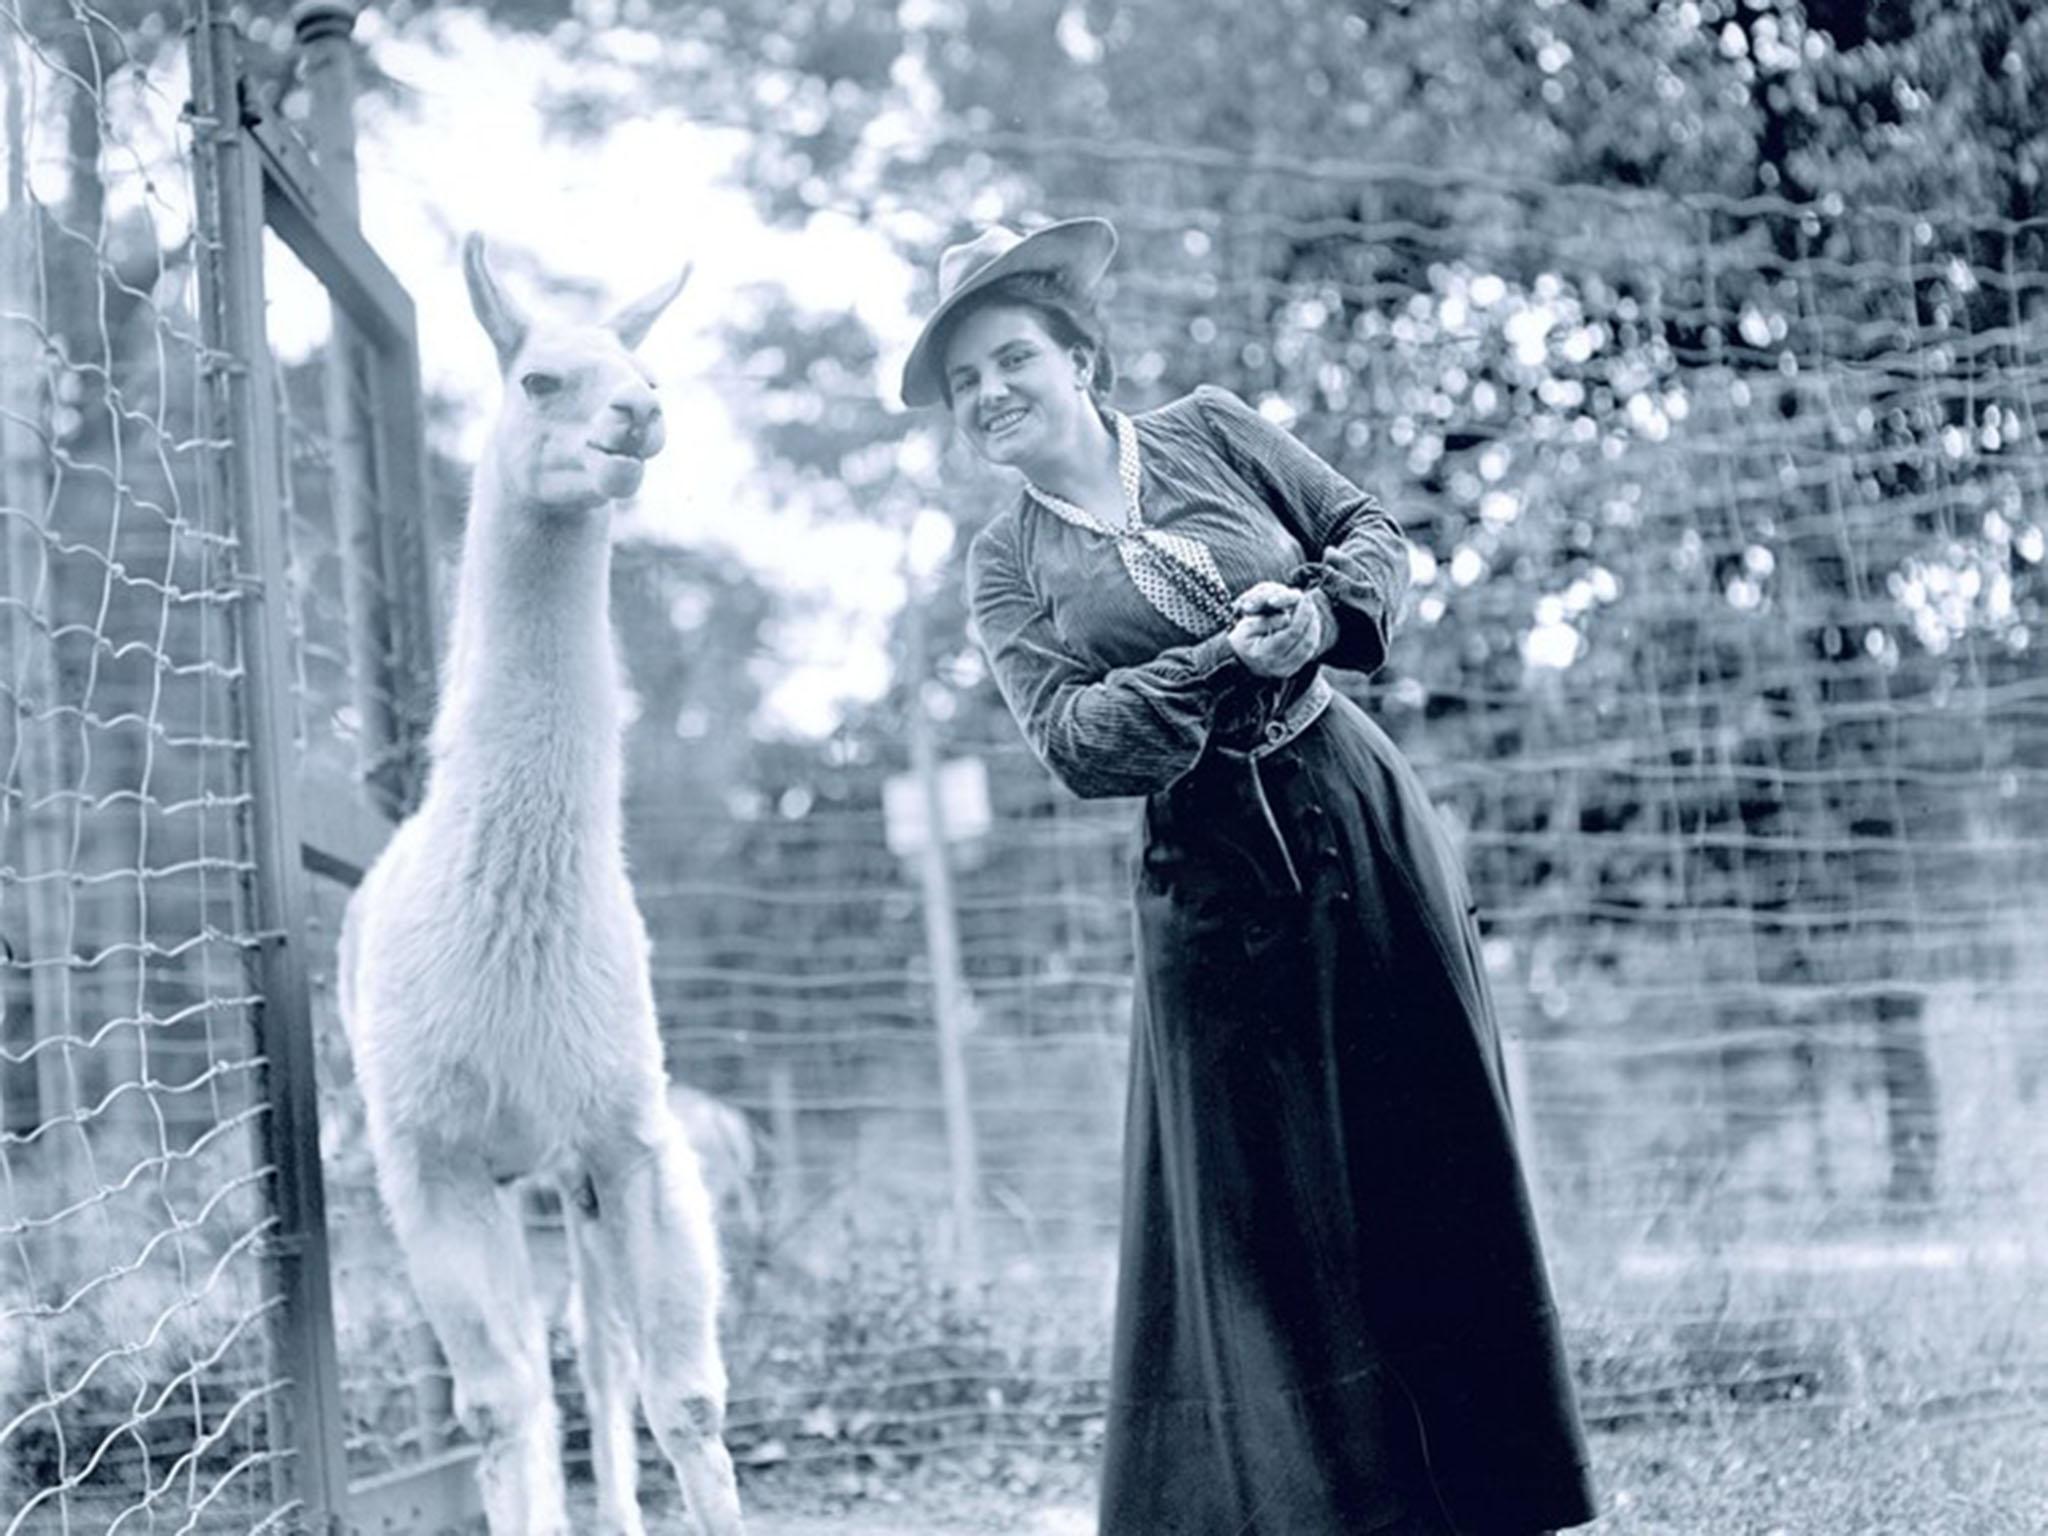 Harriet Franklin poses with a llama at the zoo, 1912 (Author provided)